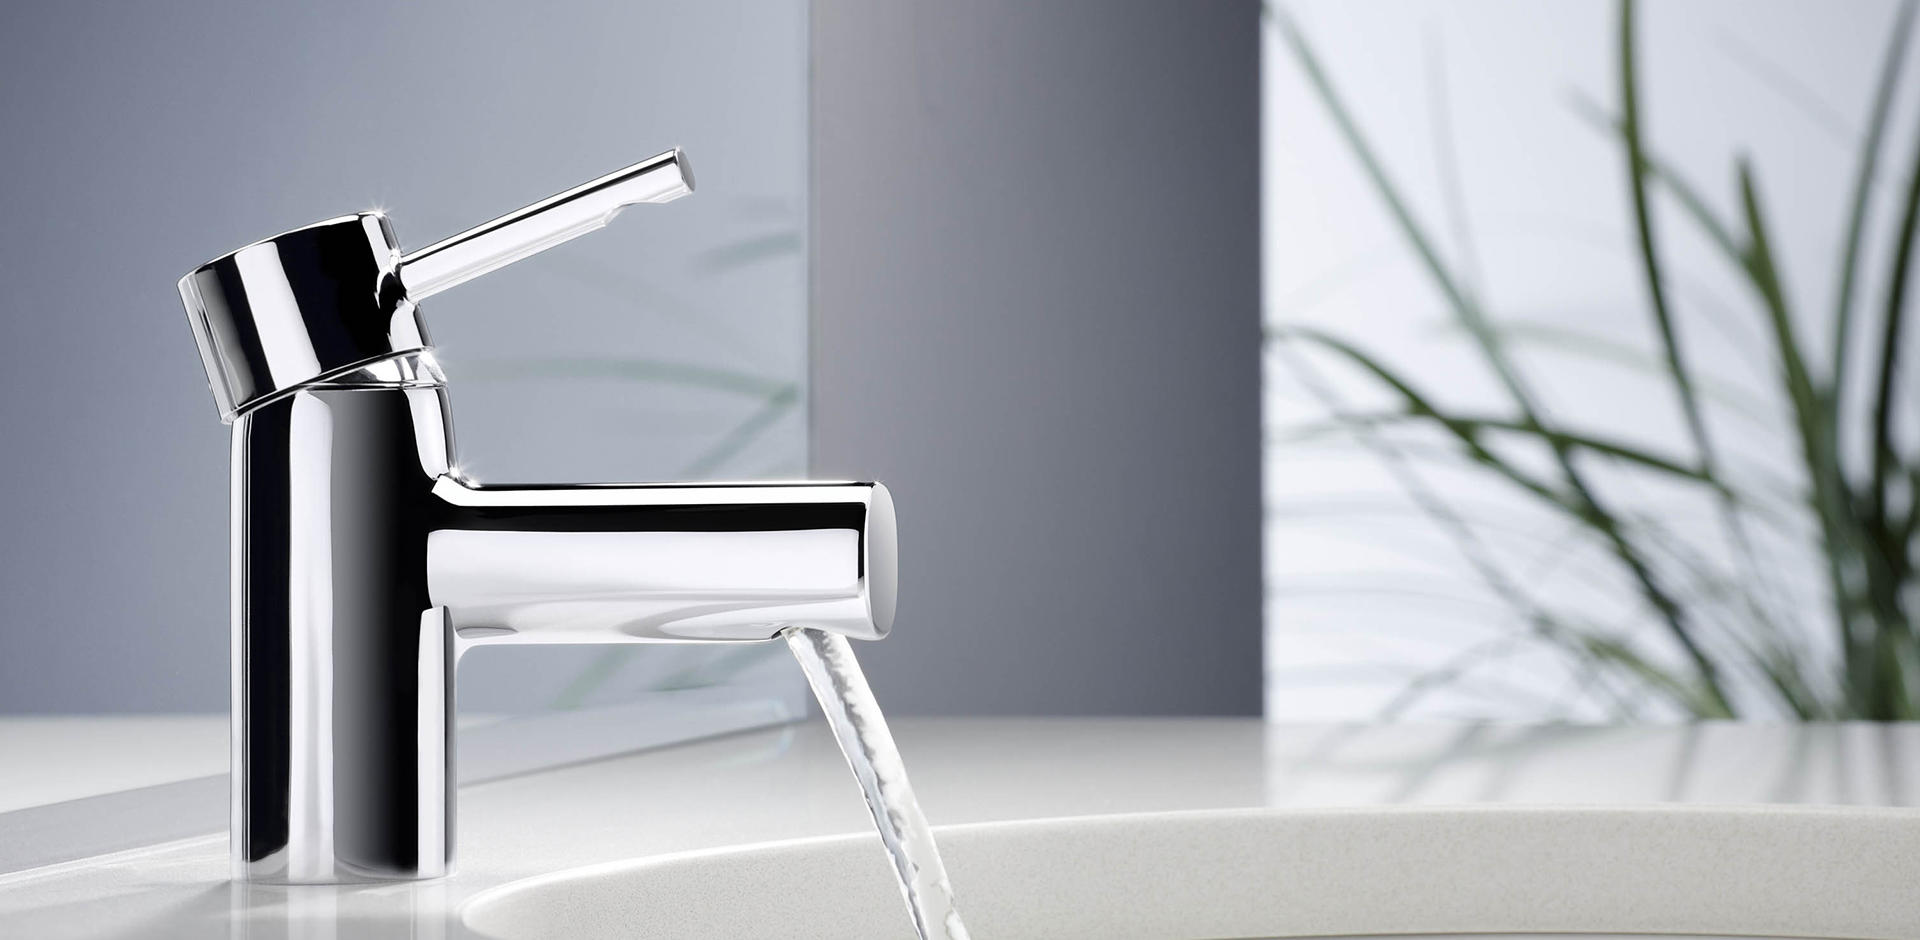 Do You Know The Classification Of Sink Faucets?